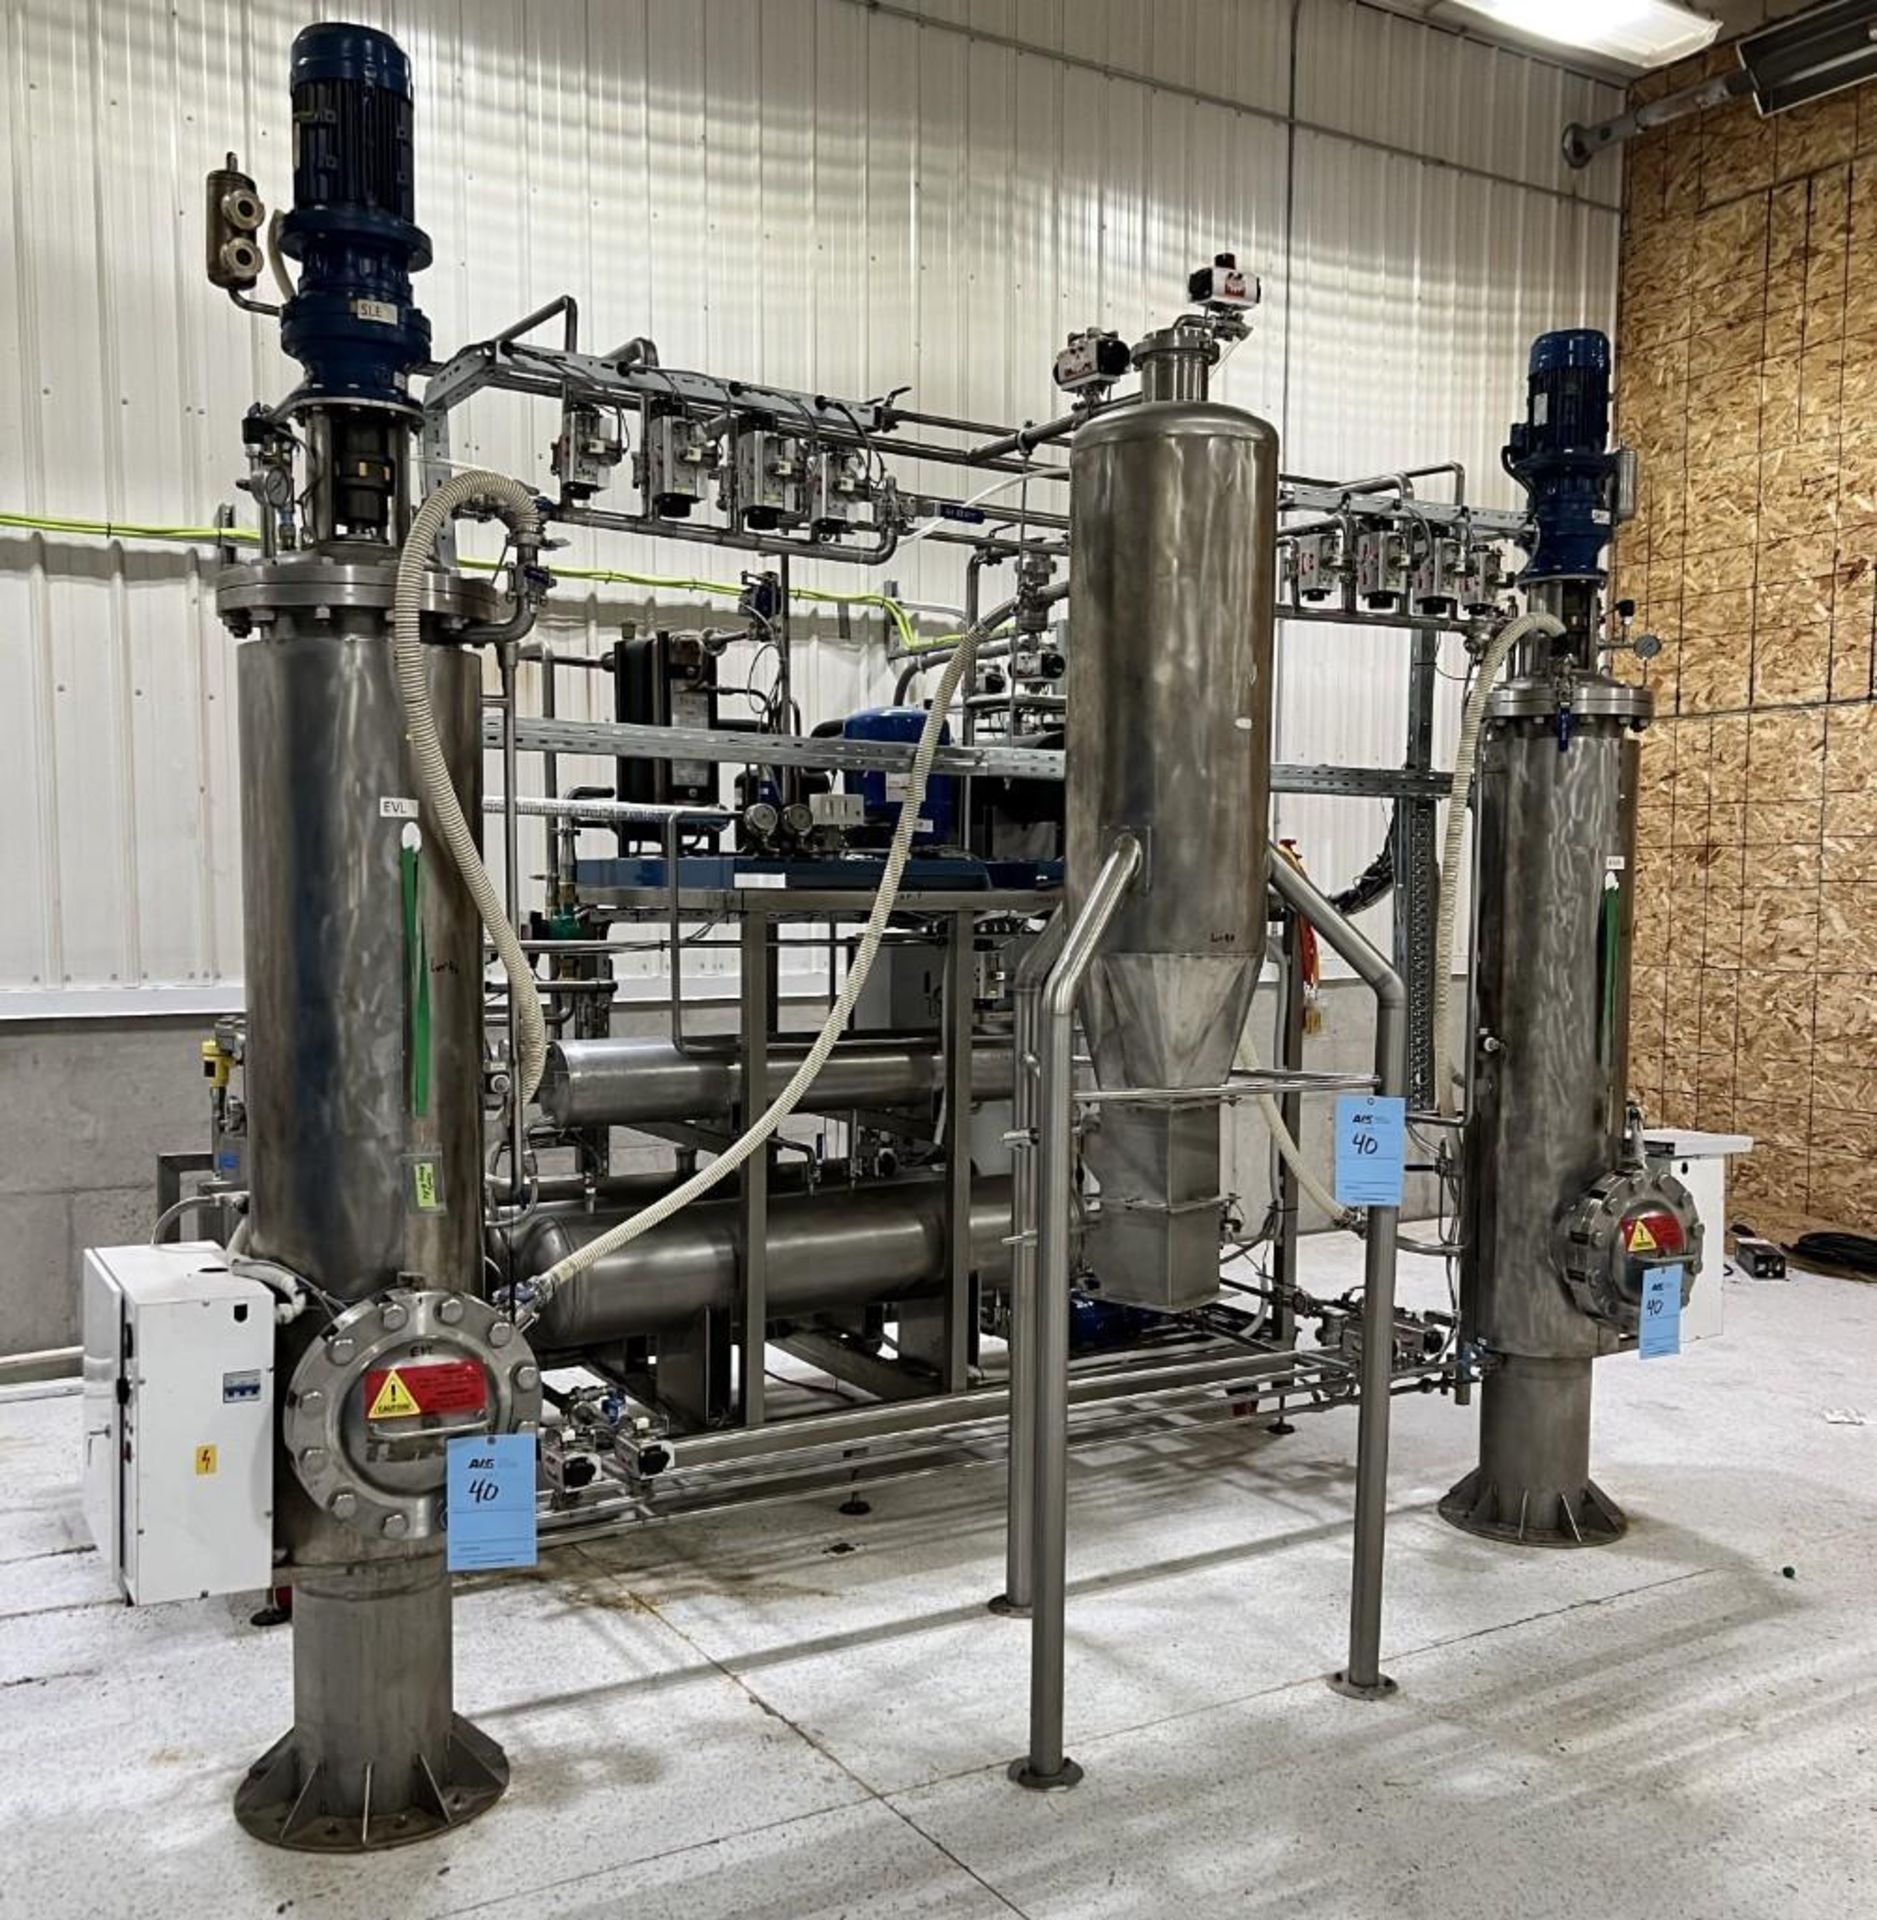 Comeg 200L LPE Stainless Steel Extraction System. With (2) 100 liter agitated extraction vessels, se - Image 2 of 35